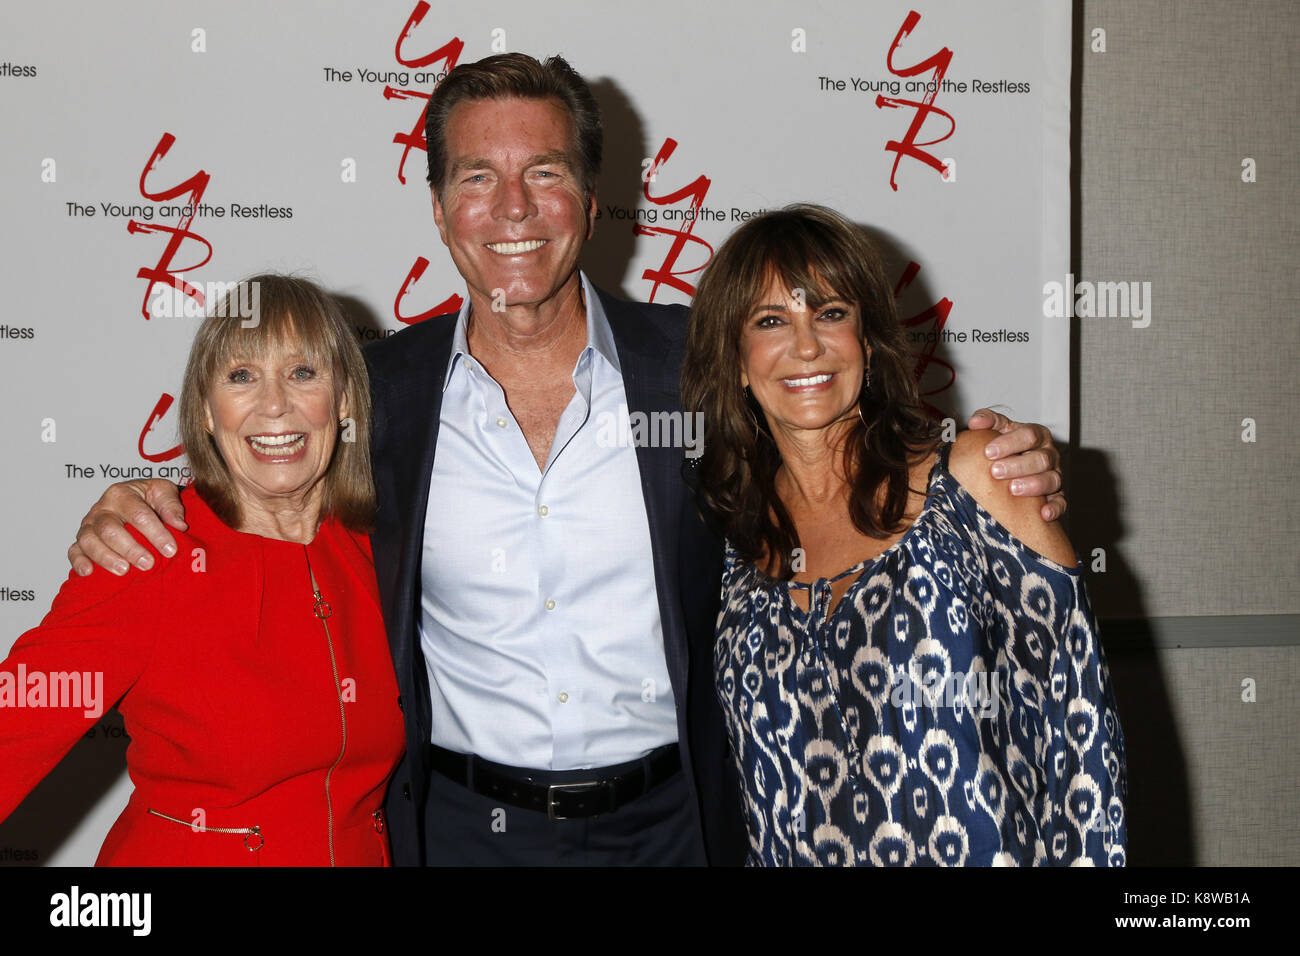 Young and Restless Fan Event 2017 at the Marriott Burbank Convention Center on August 19, 2017 in Burbank, CA  Featuring: Marla Adams, Peter Bergman, Jess Walton Where: Burbank, California, United States When: 20 Aug 2017 Credit: Nicky Nelson/WENN.com Stock Photo